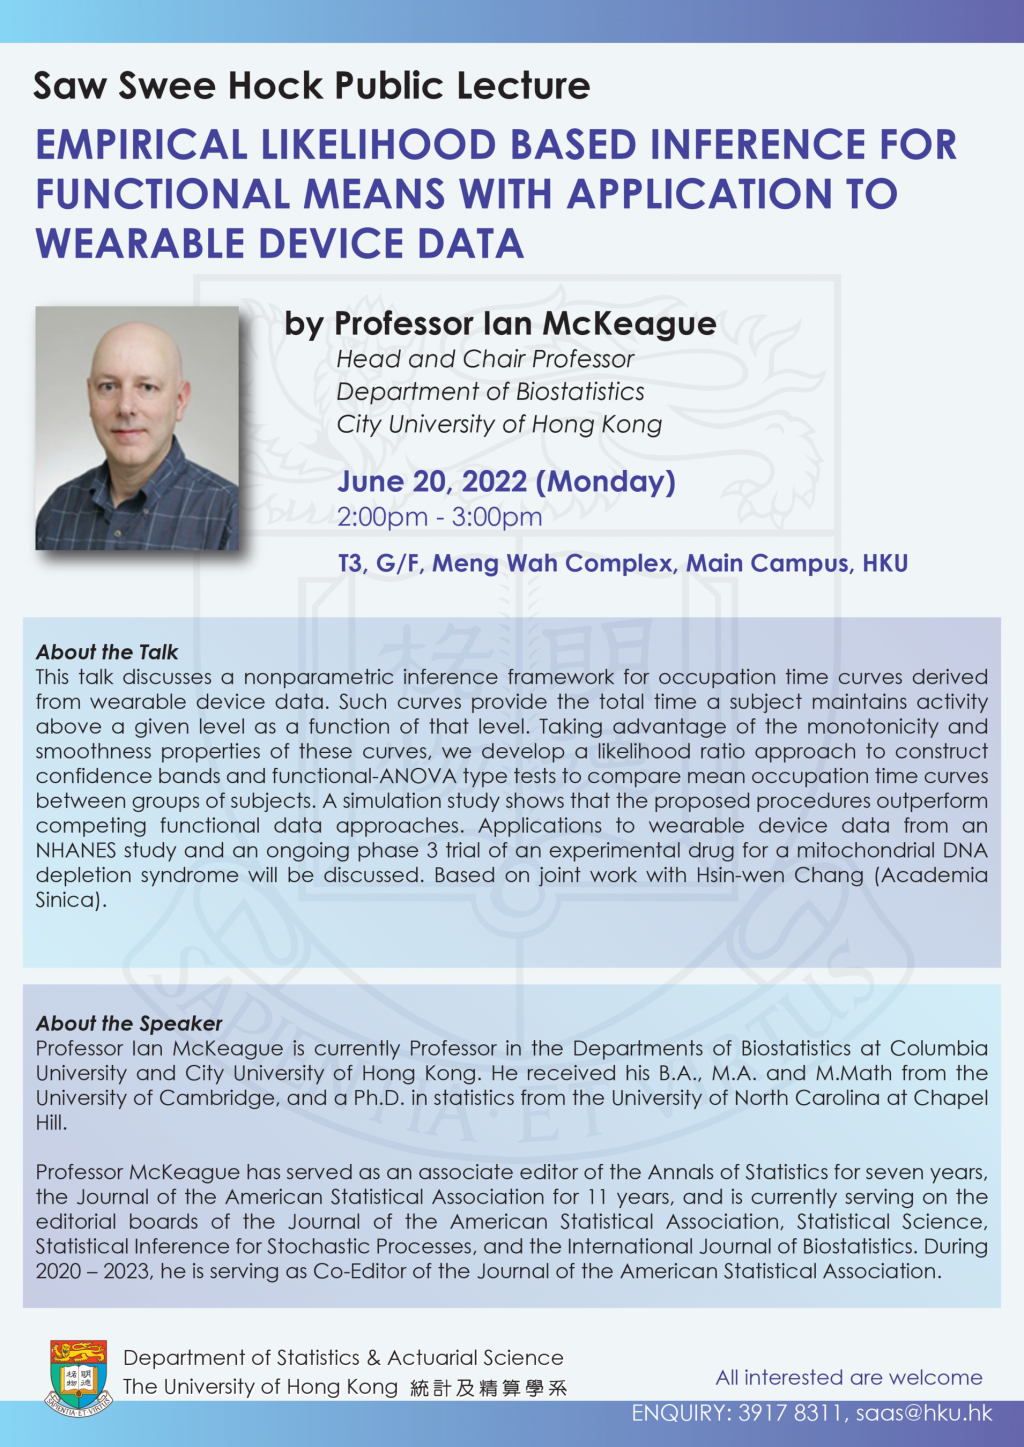 Saw Swee Hock Public Lecture on 'Empirical likelihood based inference for functional means with application to wearable device data'